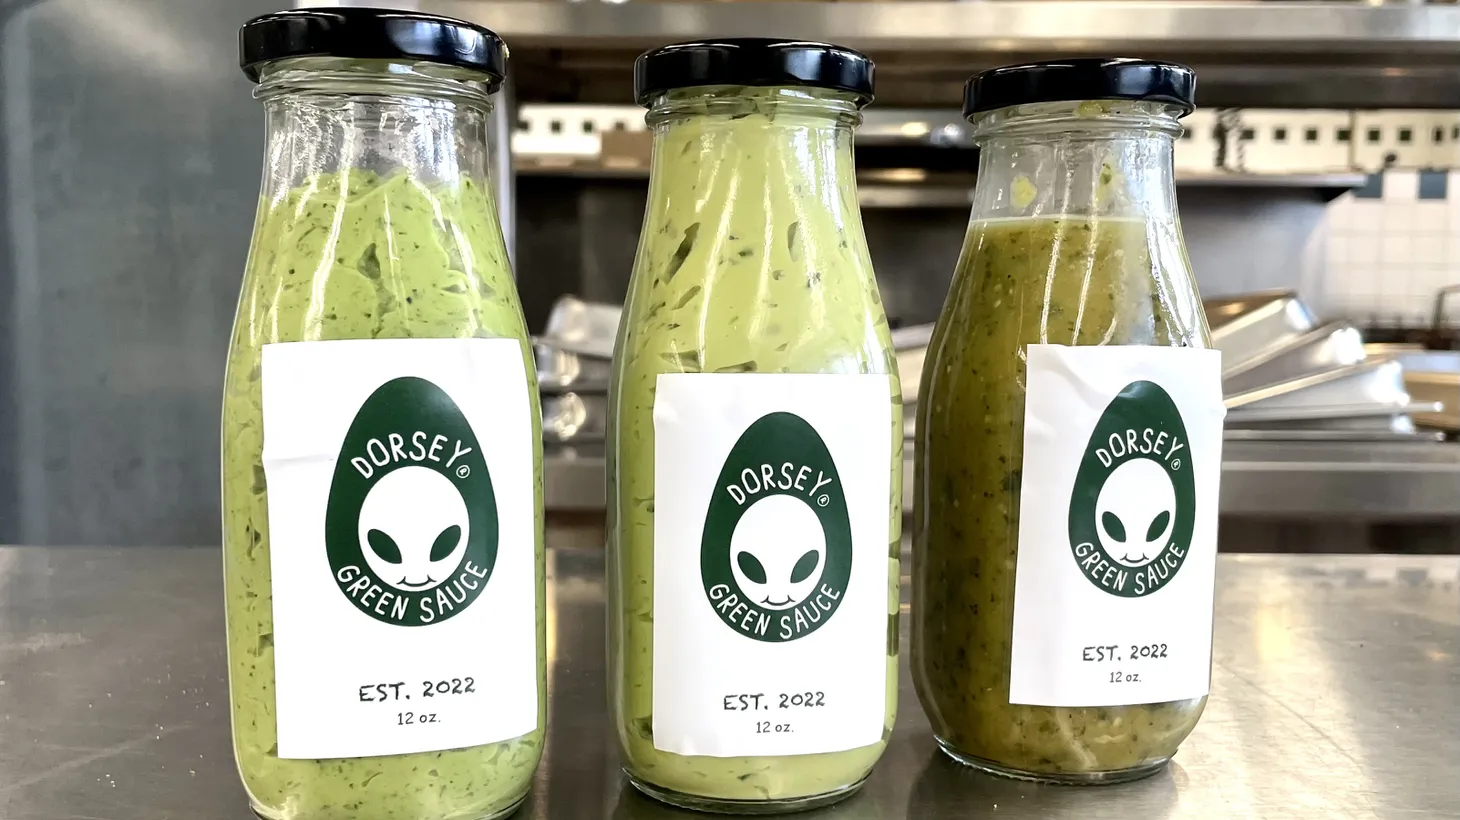 Students at LAUSD’s Dorsey High School make this avocado sauce to sell as part of a business elective.